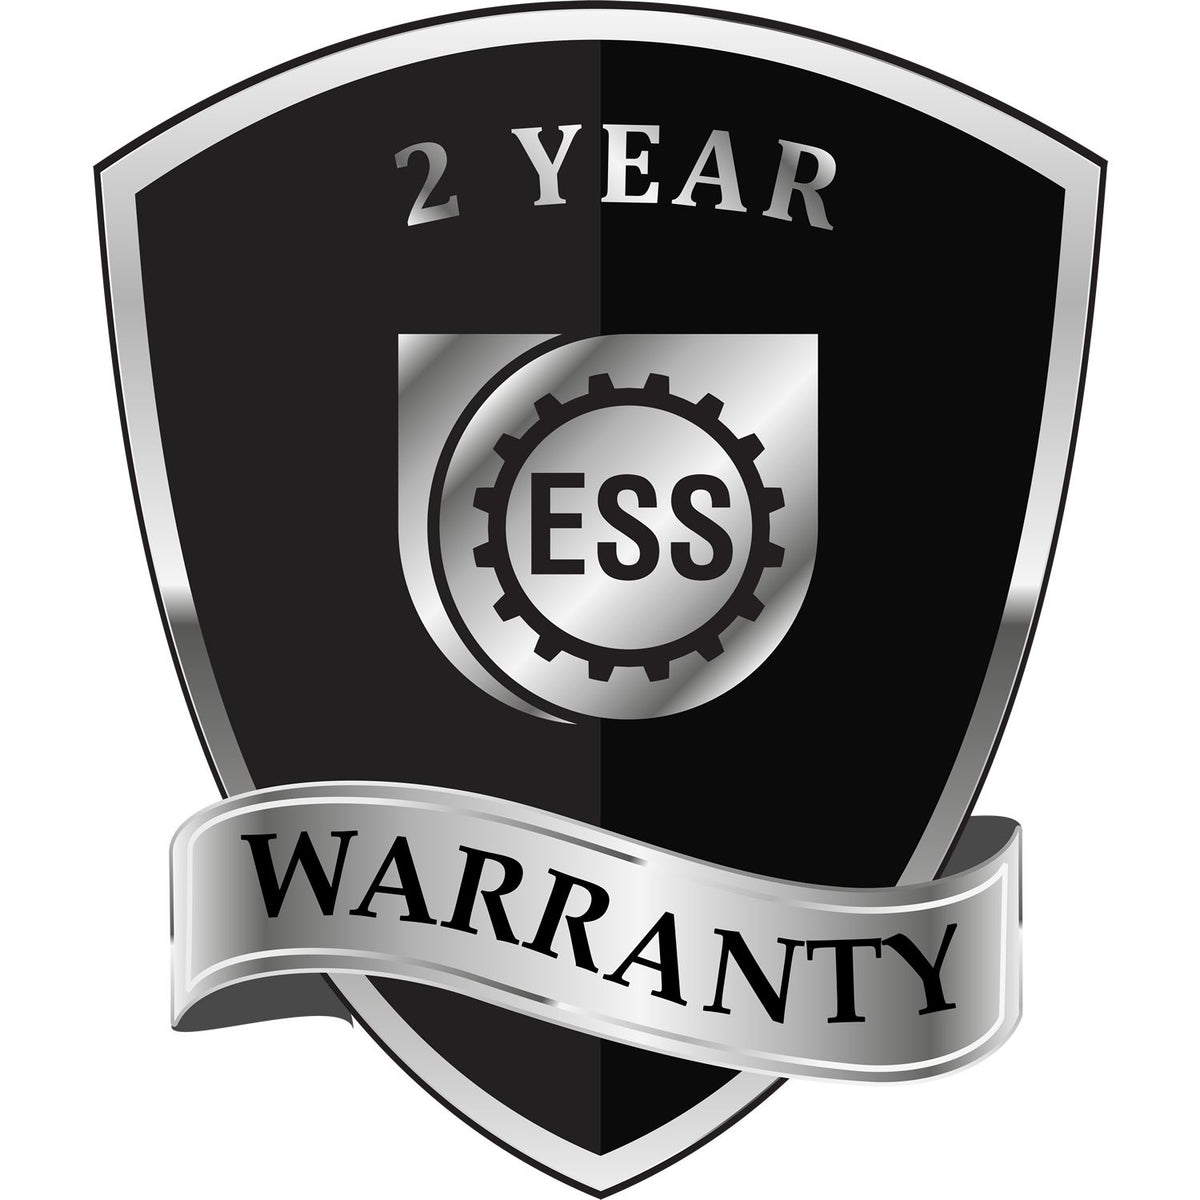 A black and silver badge or emblem showing warranty information for the State of South Dakota Extended Long Reach Geologist Seal